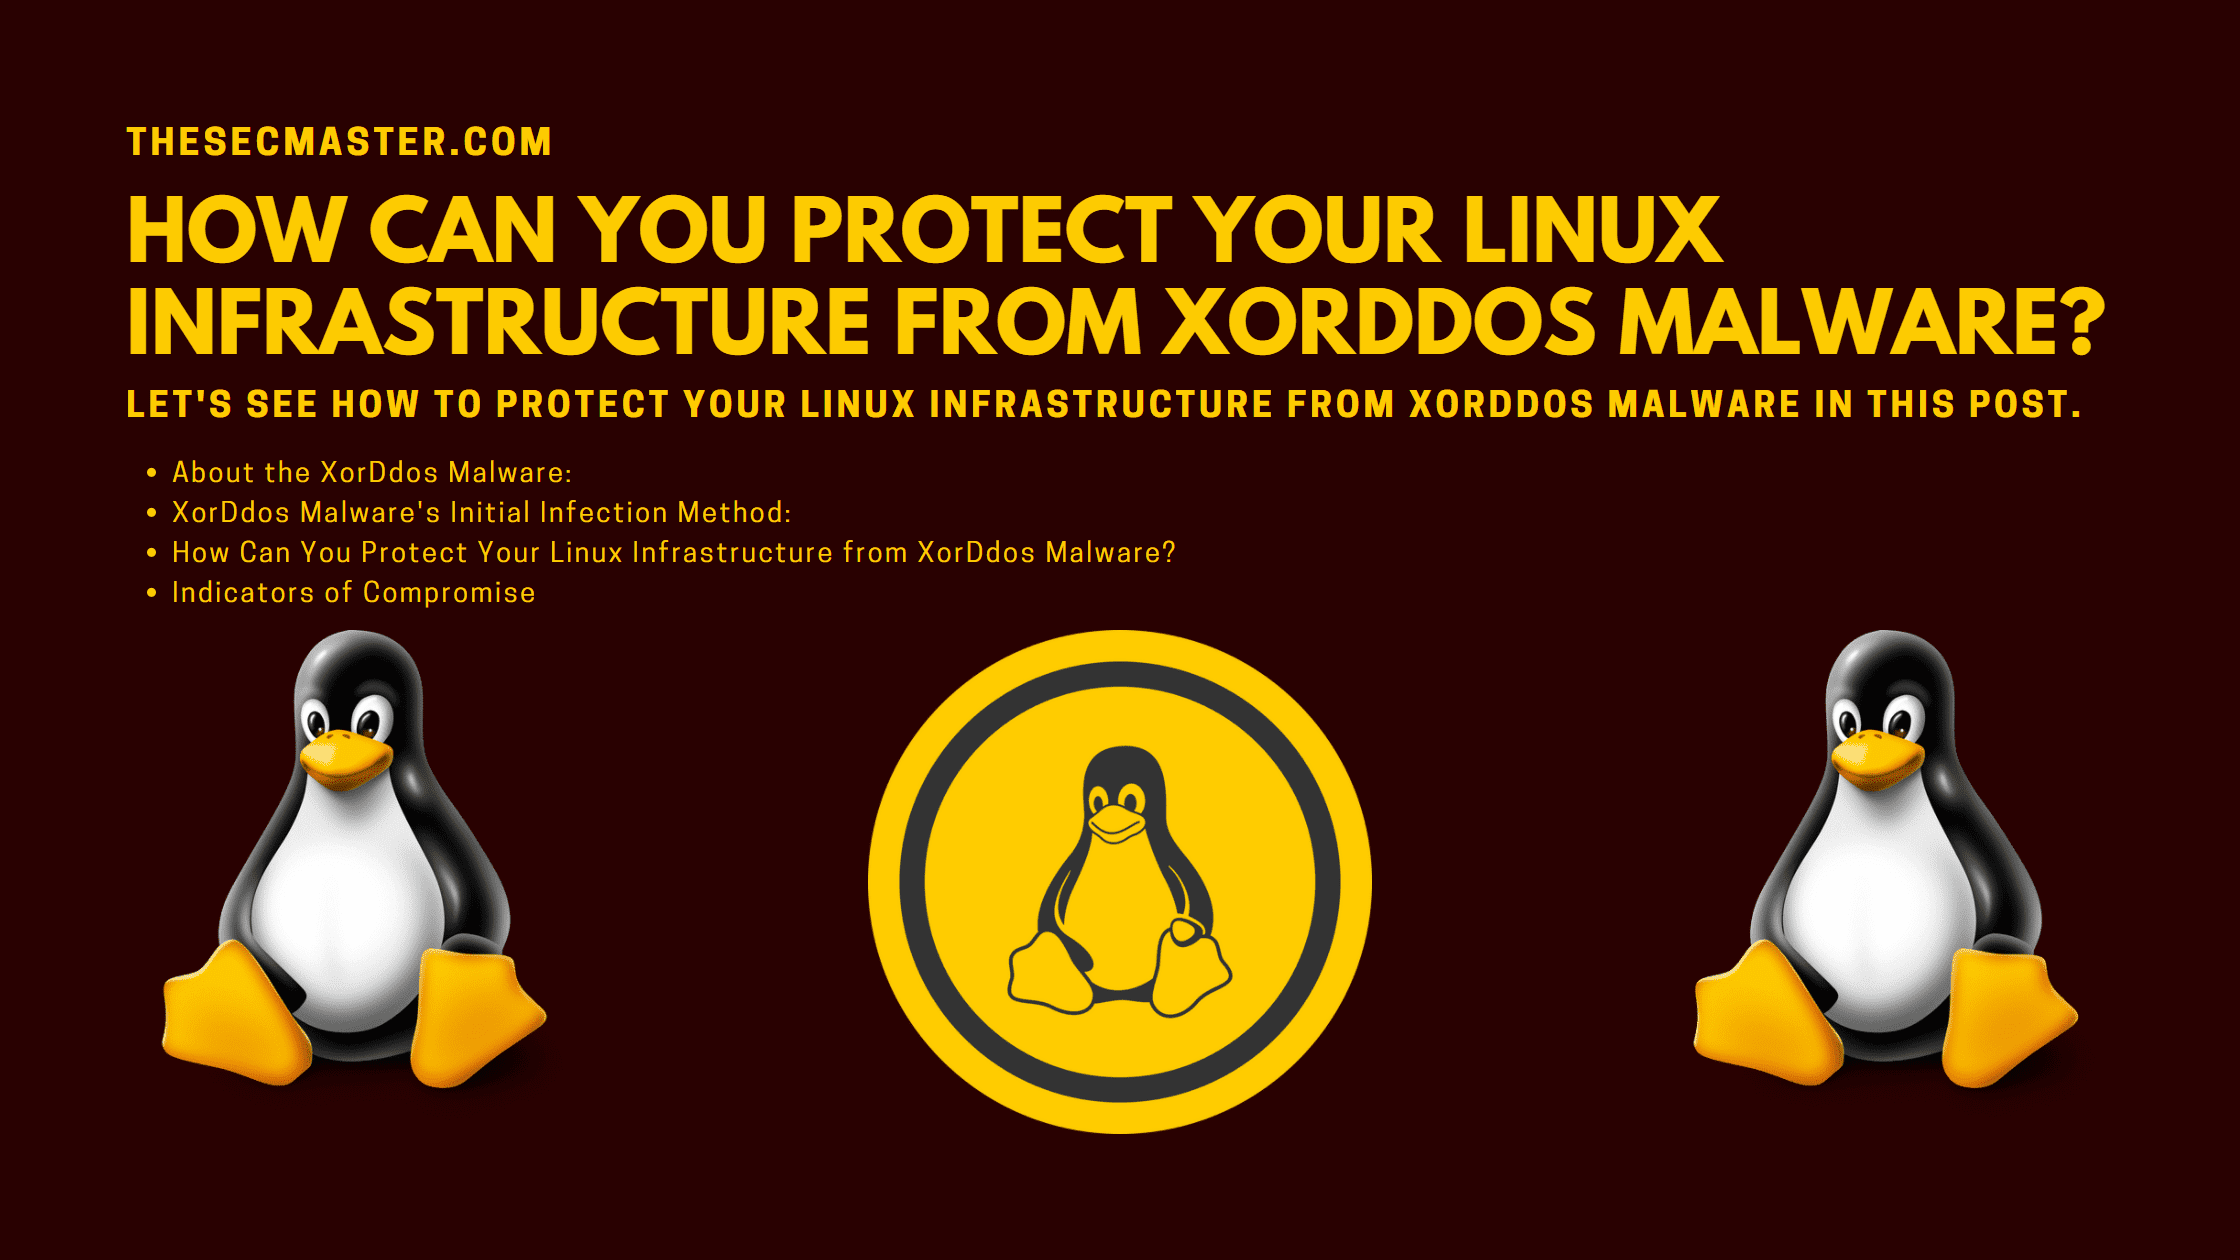 How Can You Protect Your Linux Infrastructure From Xorddos Malware